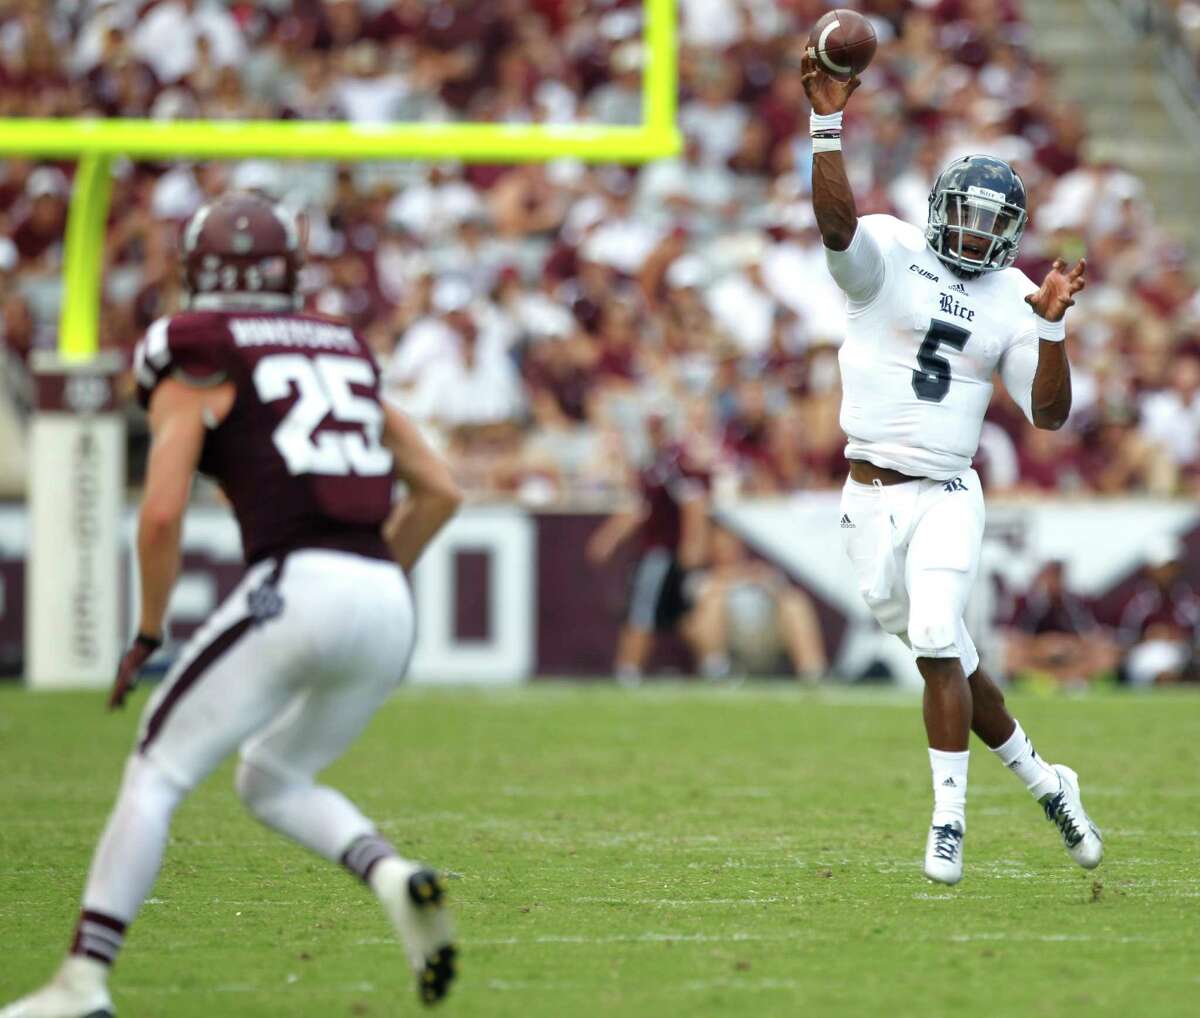 Driphus Jackson has a leg up on replacing Taylor McHargue as Rice's starting quarterback.